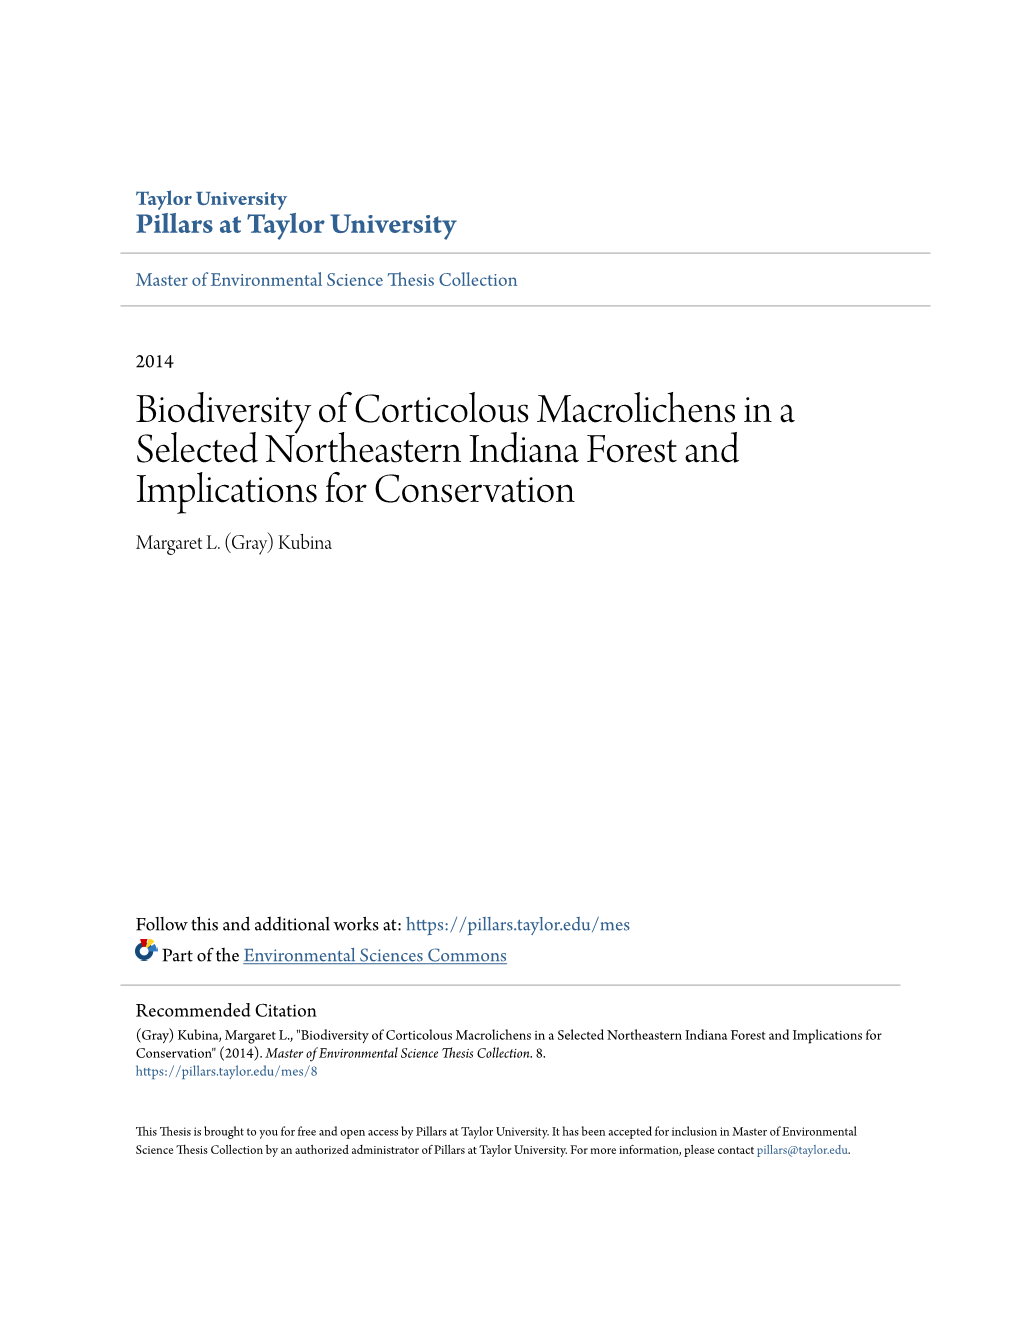 Biodiversity of Corticolous Macrolichens in a Selected Northeastern Indiana Forest and Implications for Conservation Margaret L